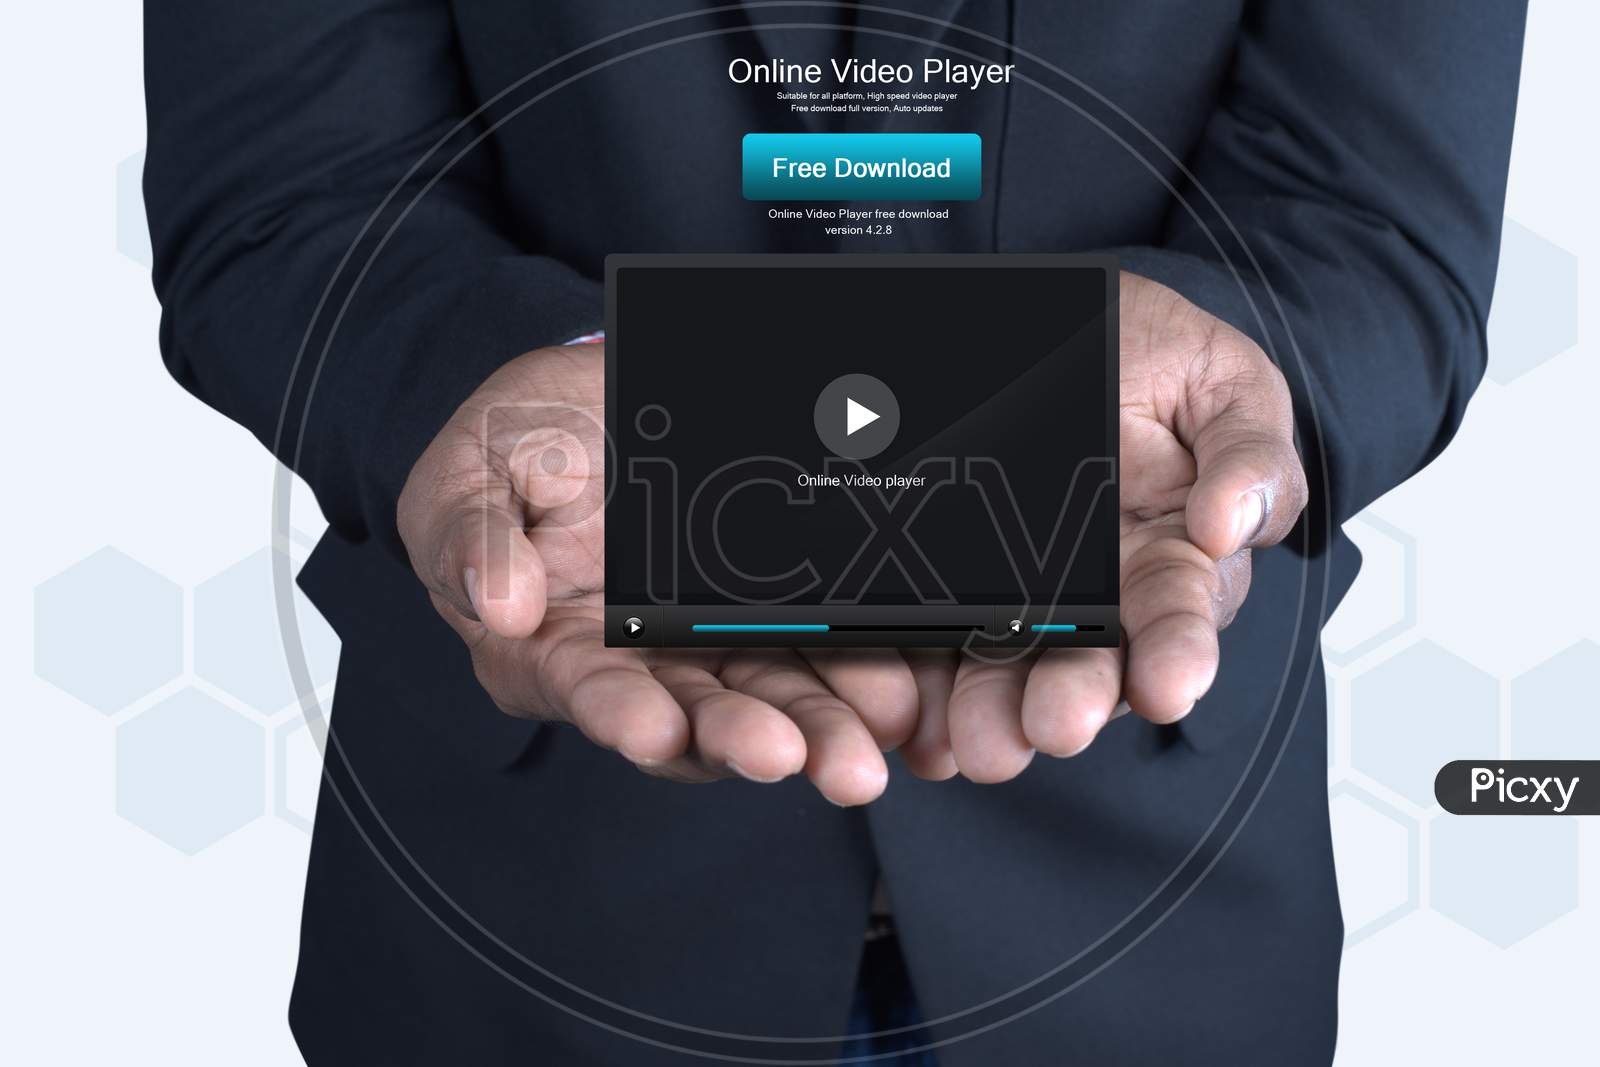 Close up shot of a Person's hands with Online Video Player